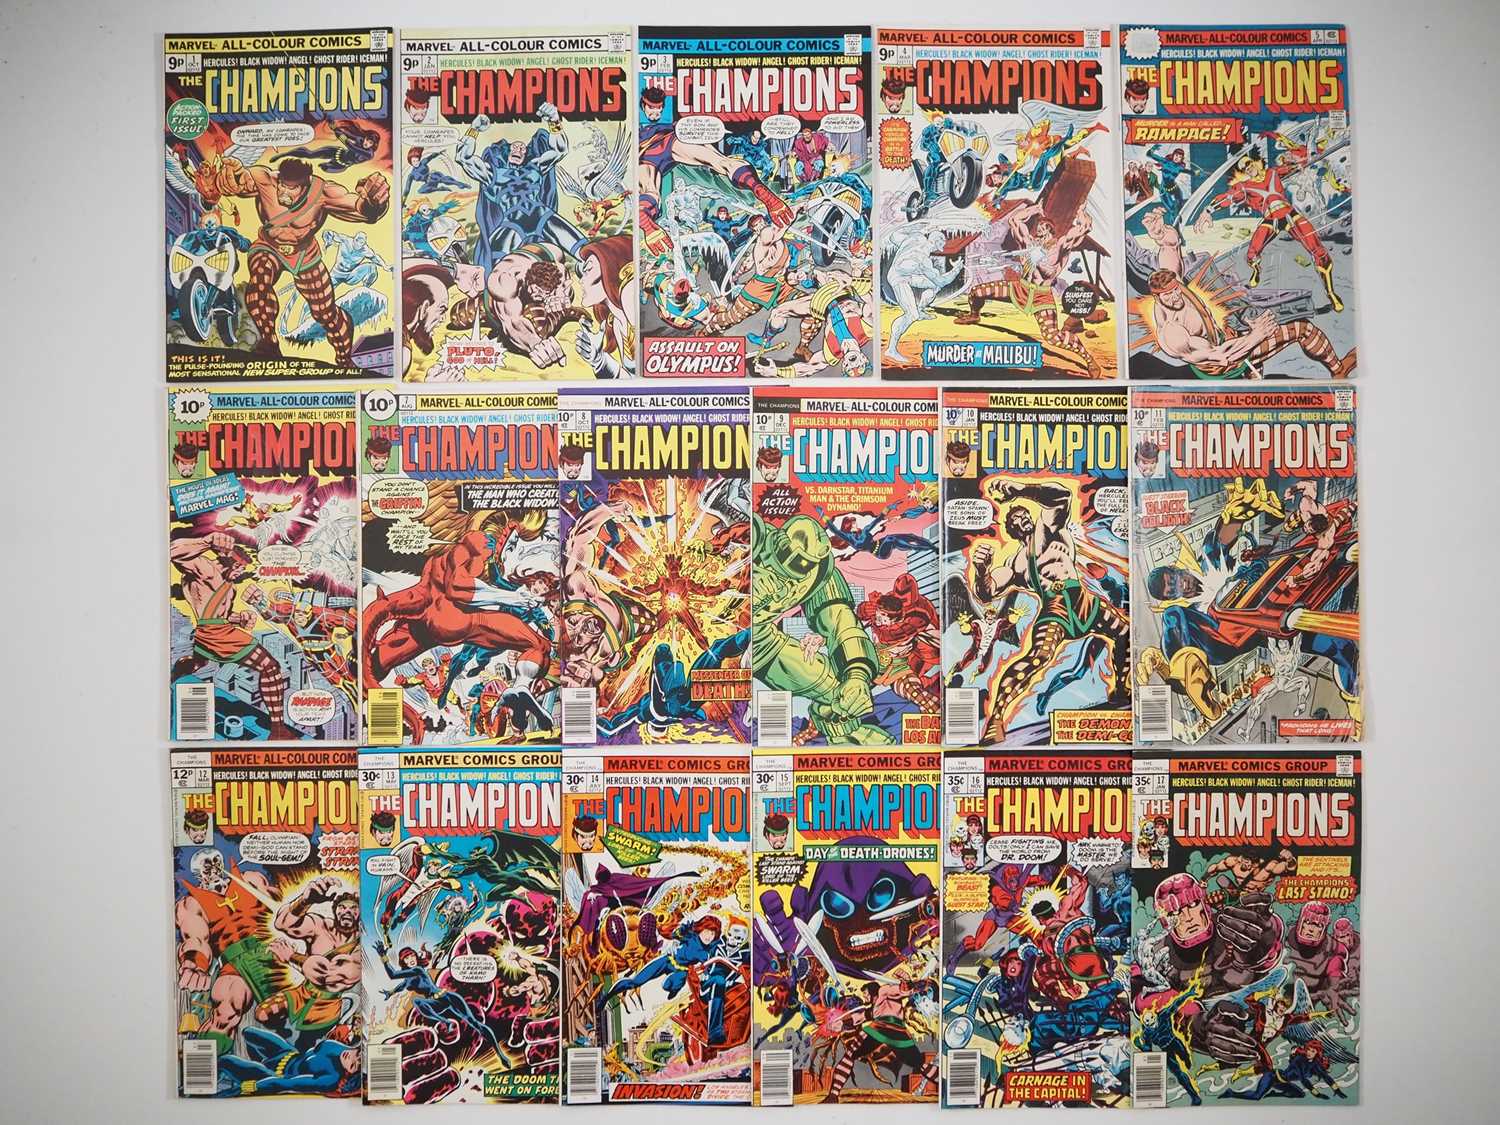 THE CHAMPIONS #1, 2, 3, 4, 5, 6, 7, 8, 9, 10, 11, 12, 13, 14, 15, 16, 17 (17 in Lot) - (1975/